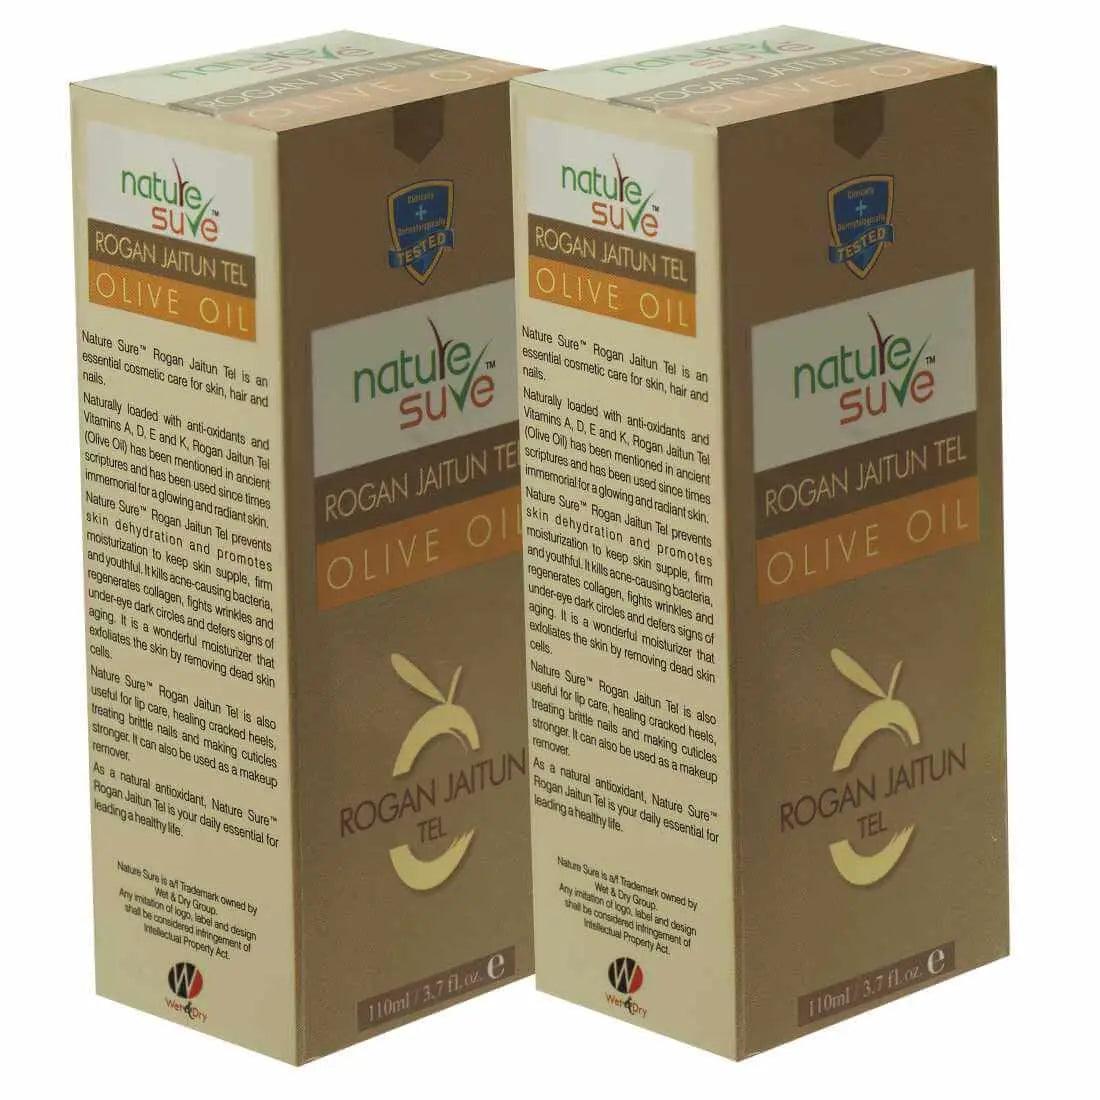 Nature Sure Rogan Jaitun Tail (Olive Oil) for Skin, Hair and Nail Care in Men & Women - 110ml 8903540009194